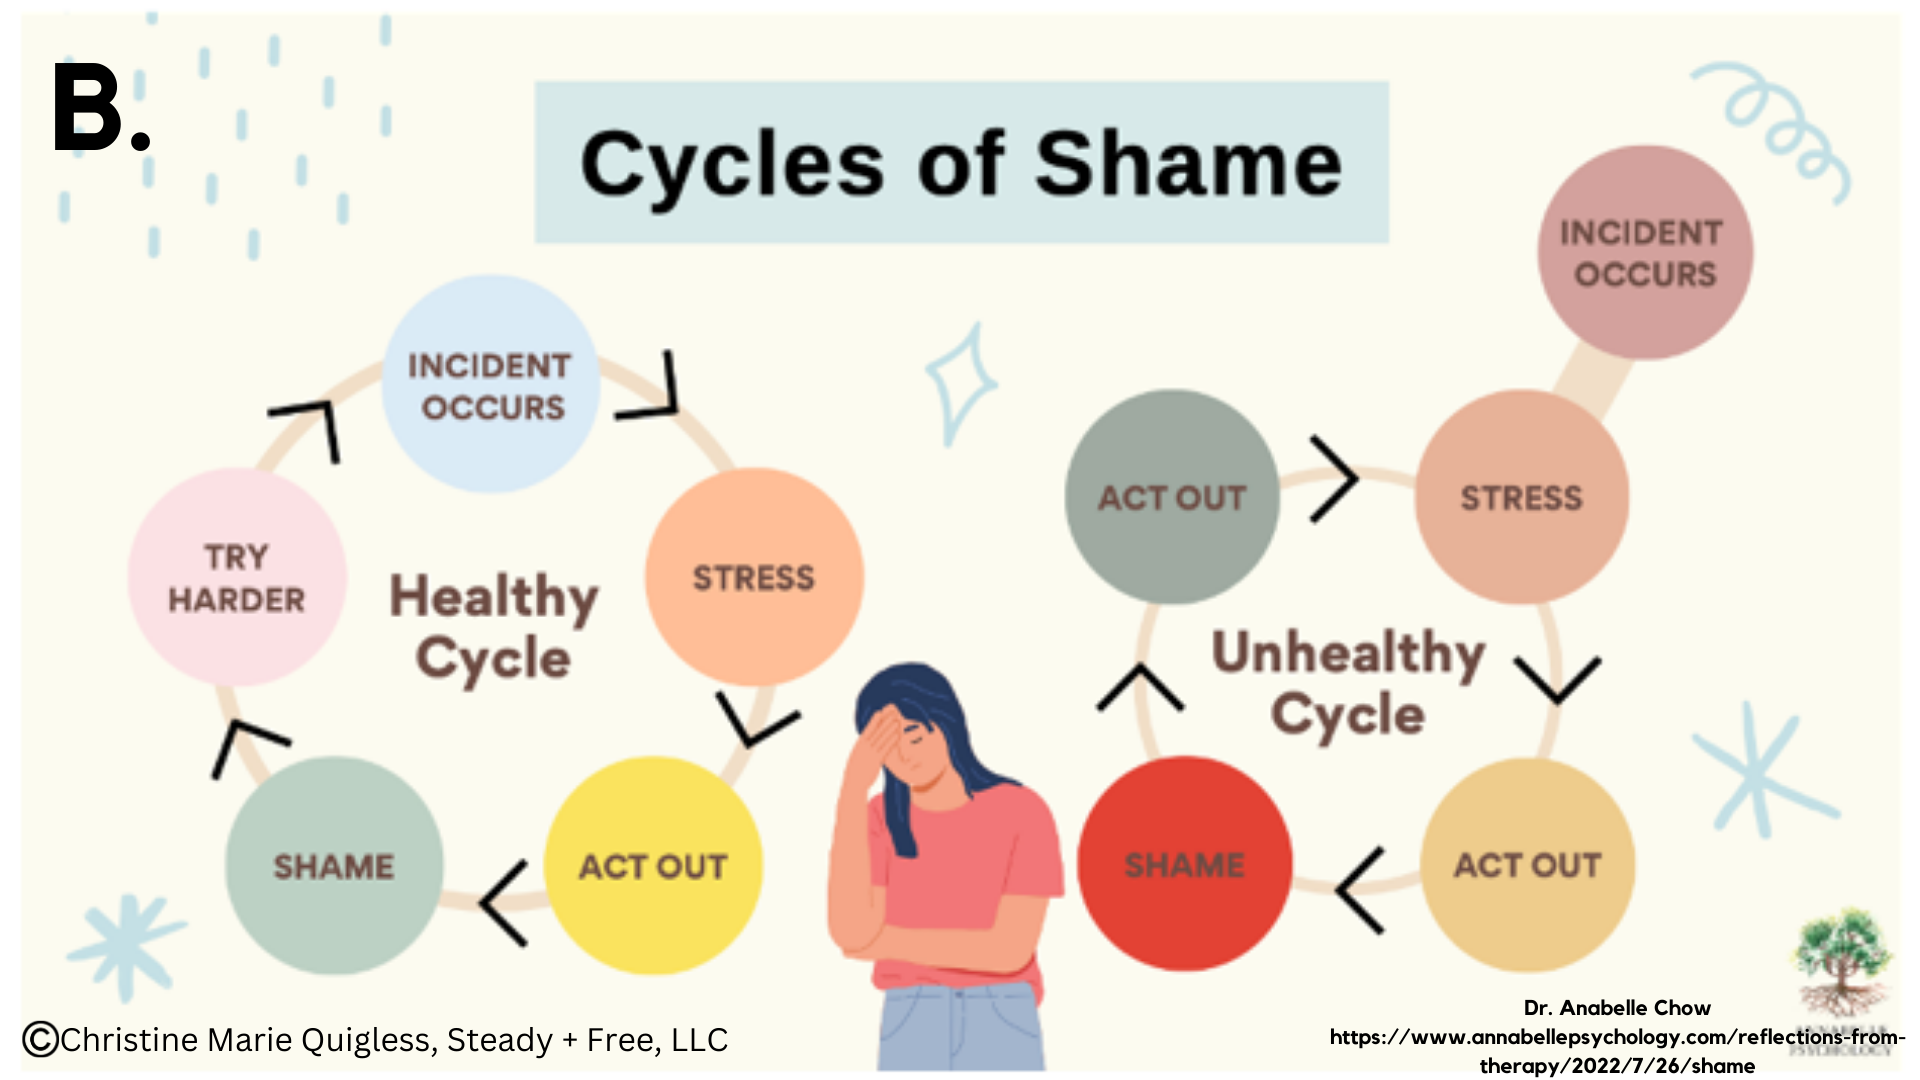 Item B. The Shame Cycle (in general)